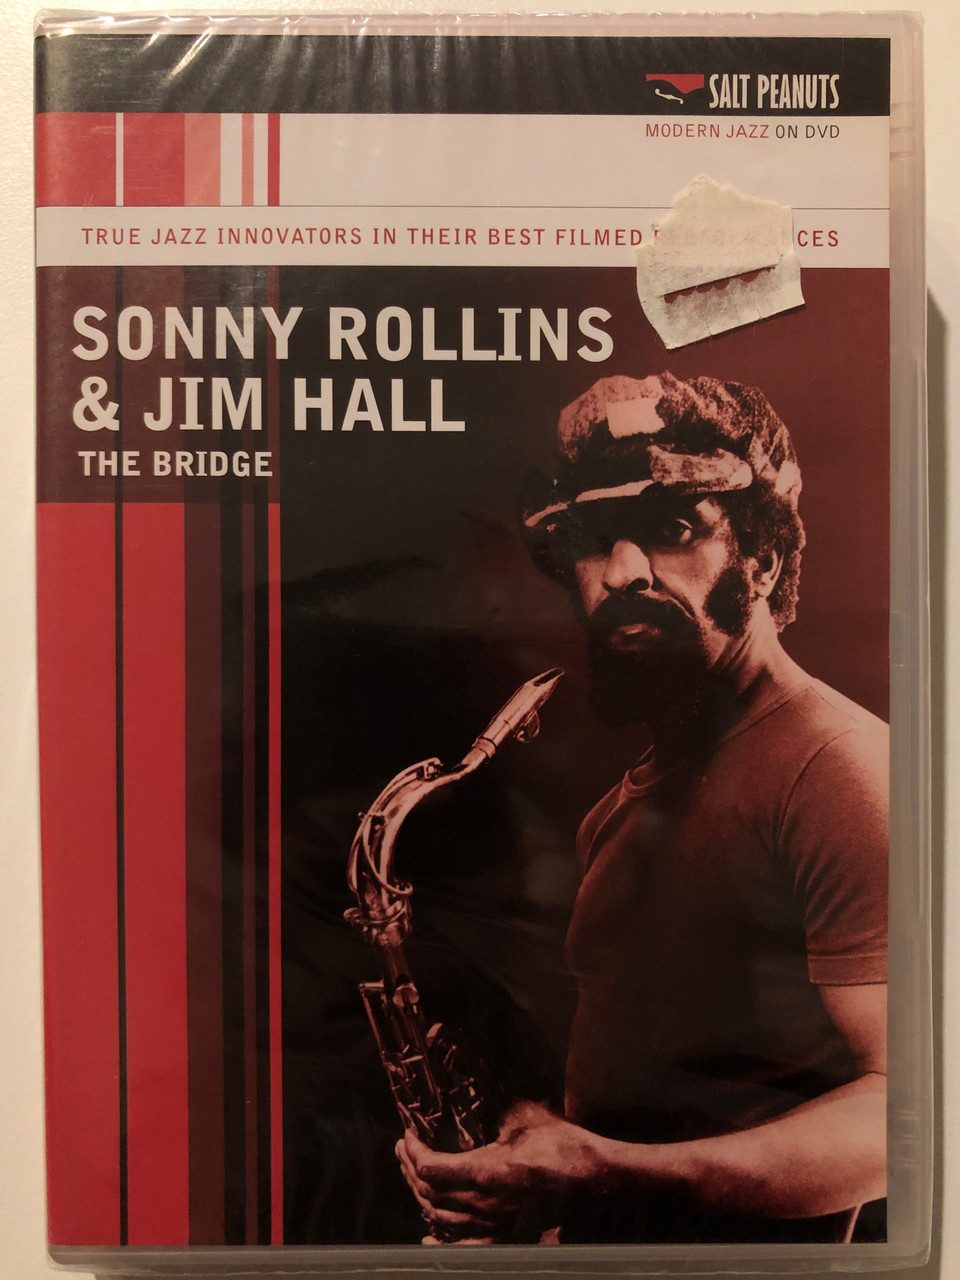 Sonny_Rollins_and_Jim_Hall_The_Bridge_Rare_live_footage_of_Sonny_Rollins_and_Jim_Hall_MODERN_JAZZ_ON_DVD_Jim_Hall_with_Art_Farmer_in_San_Francisco_1964_Rollins_in_the_Nether___20913.1692099941.1280.1280.JPG (960×1280)